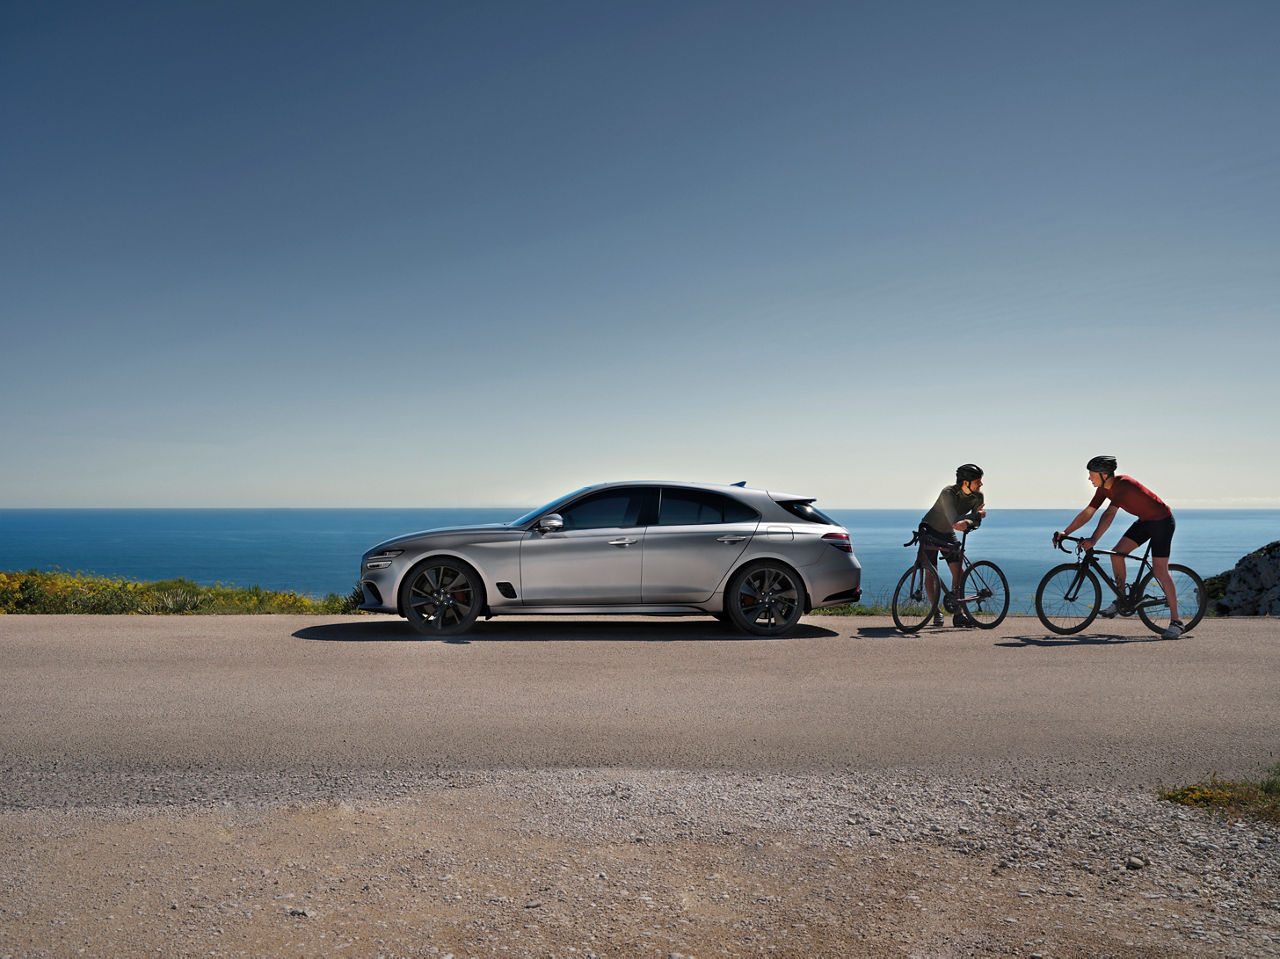 Genesis G70 Shooting Brake silver outdoor - side view in front of ocean with two cyclist